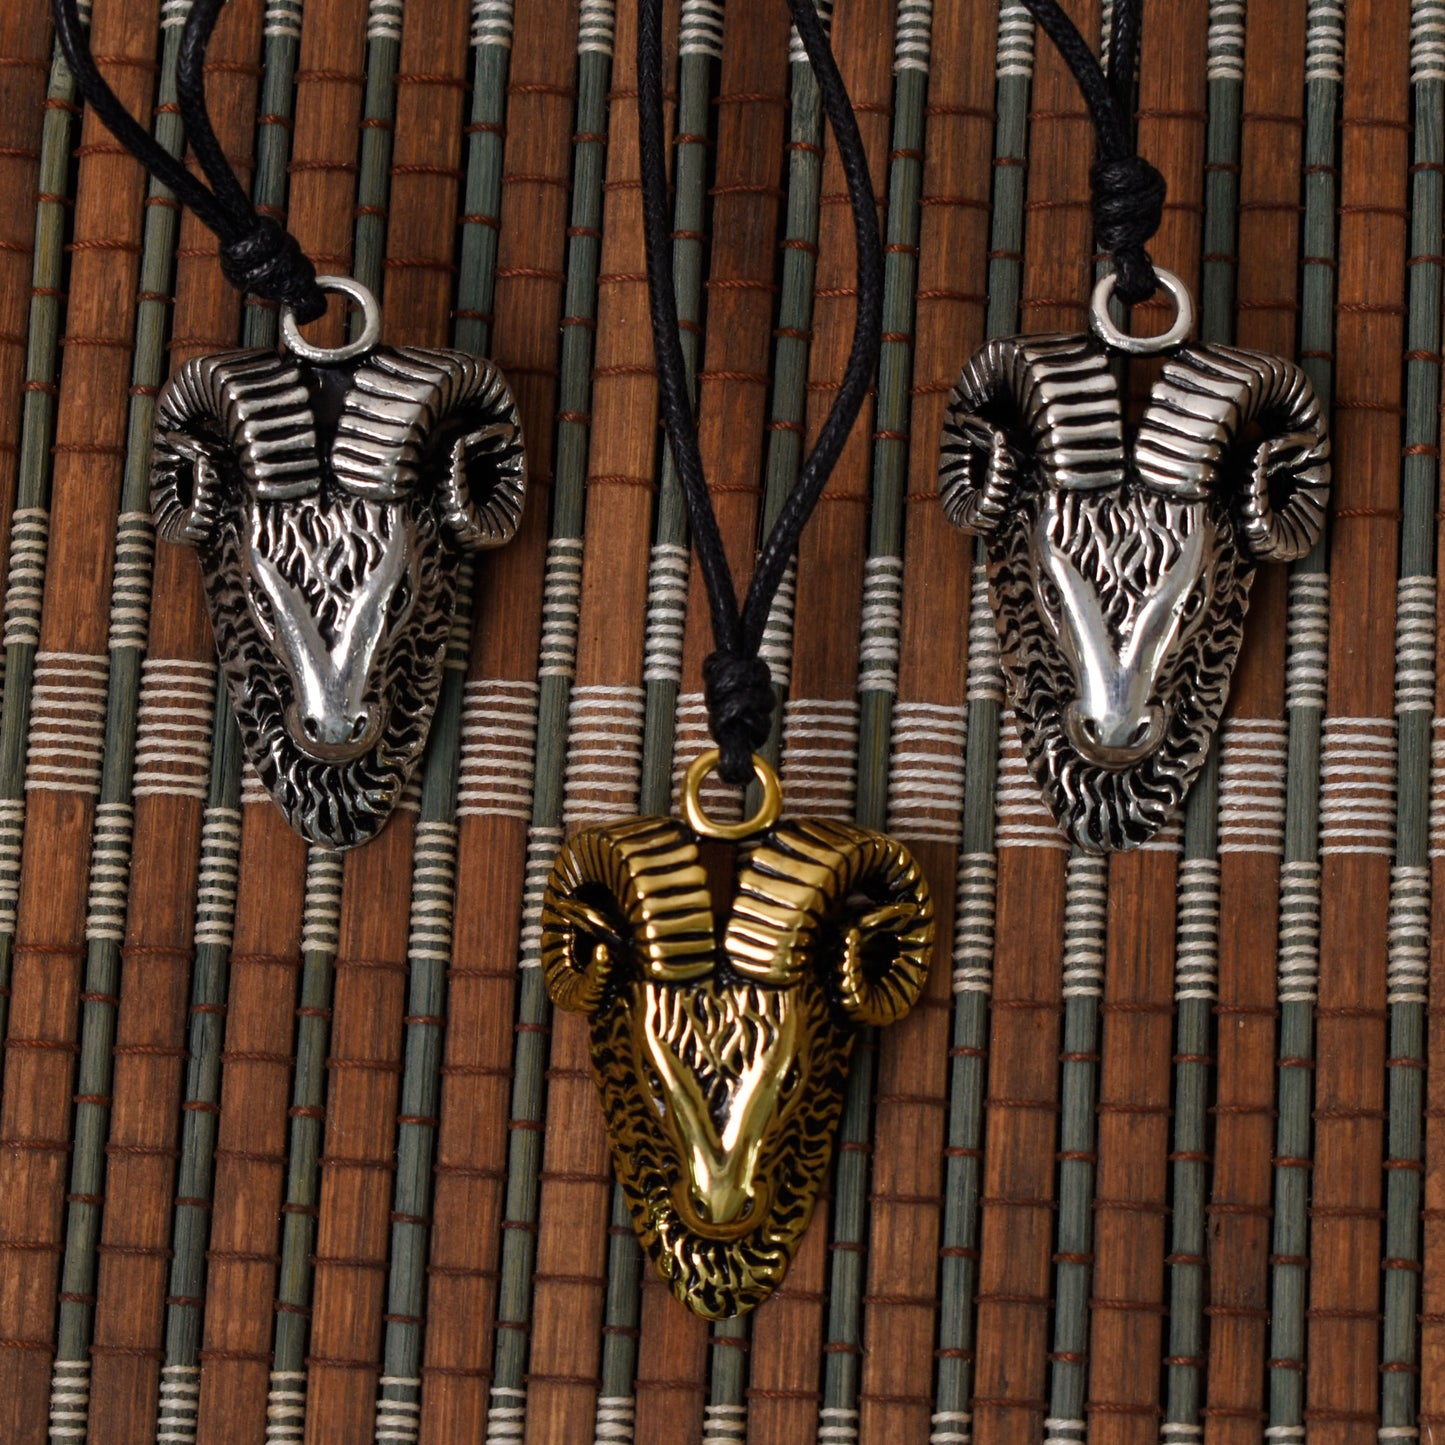 Ram Head Goat Baphomet Pagan God 92.5 Sterling Silver Necklace Pendant Jewelry